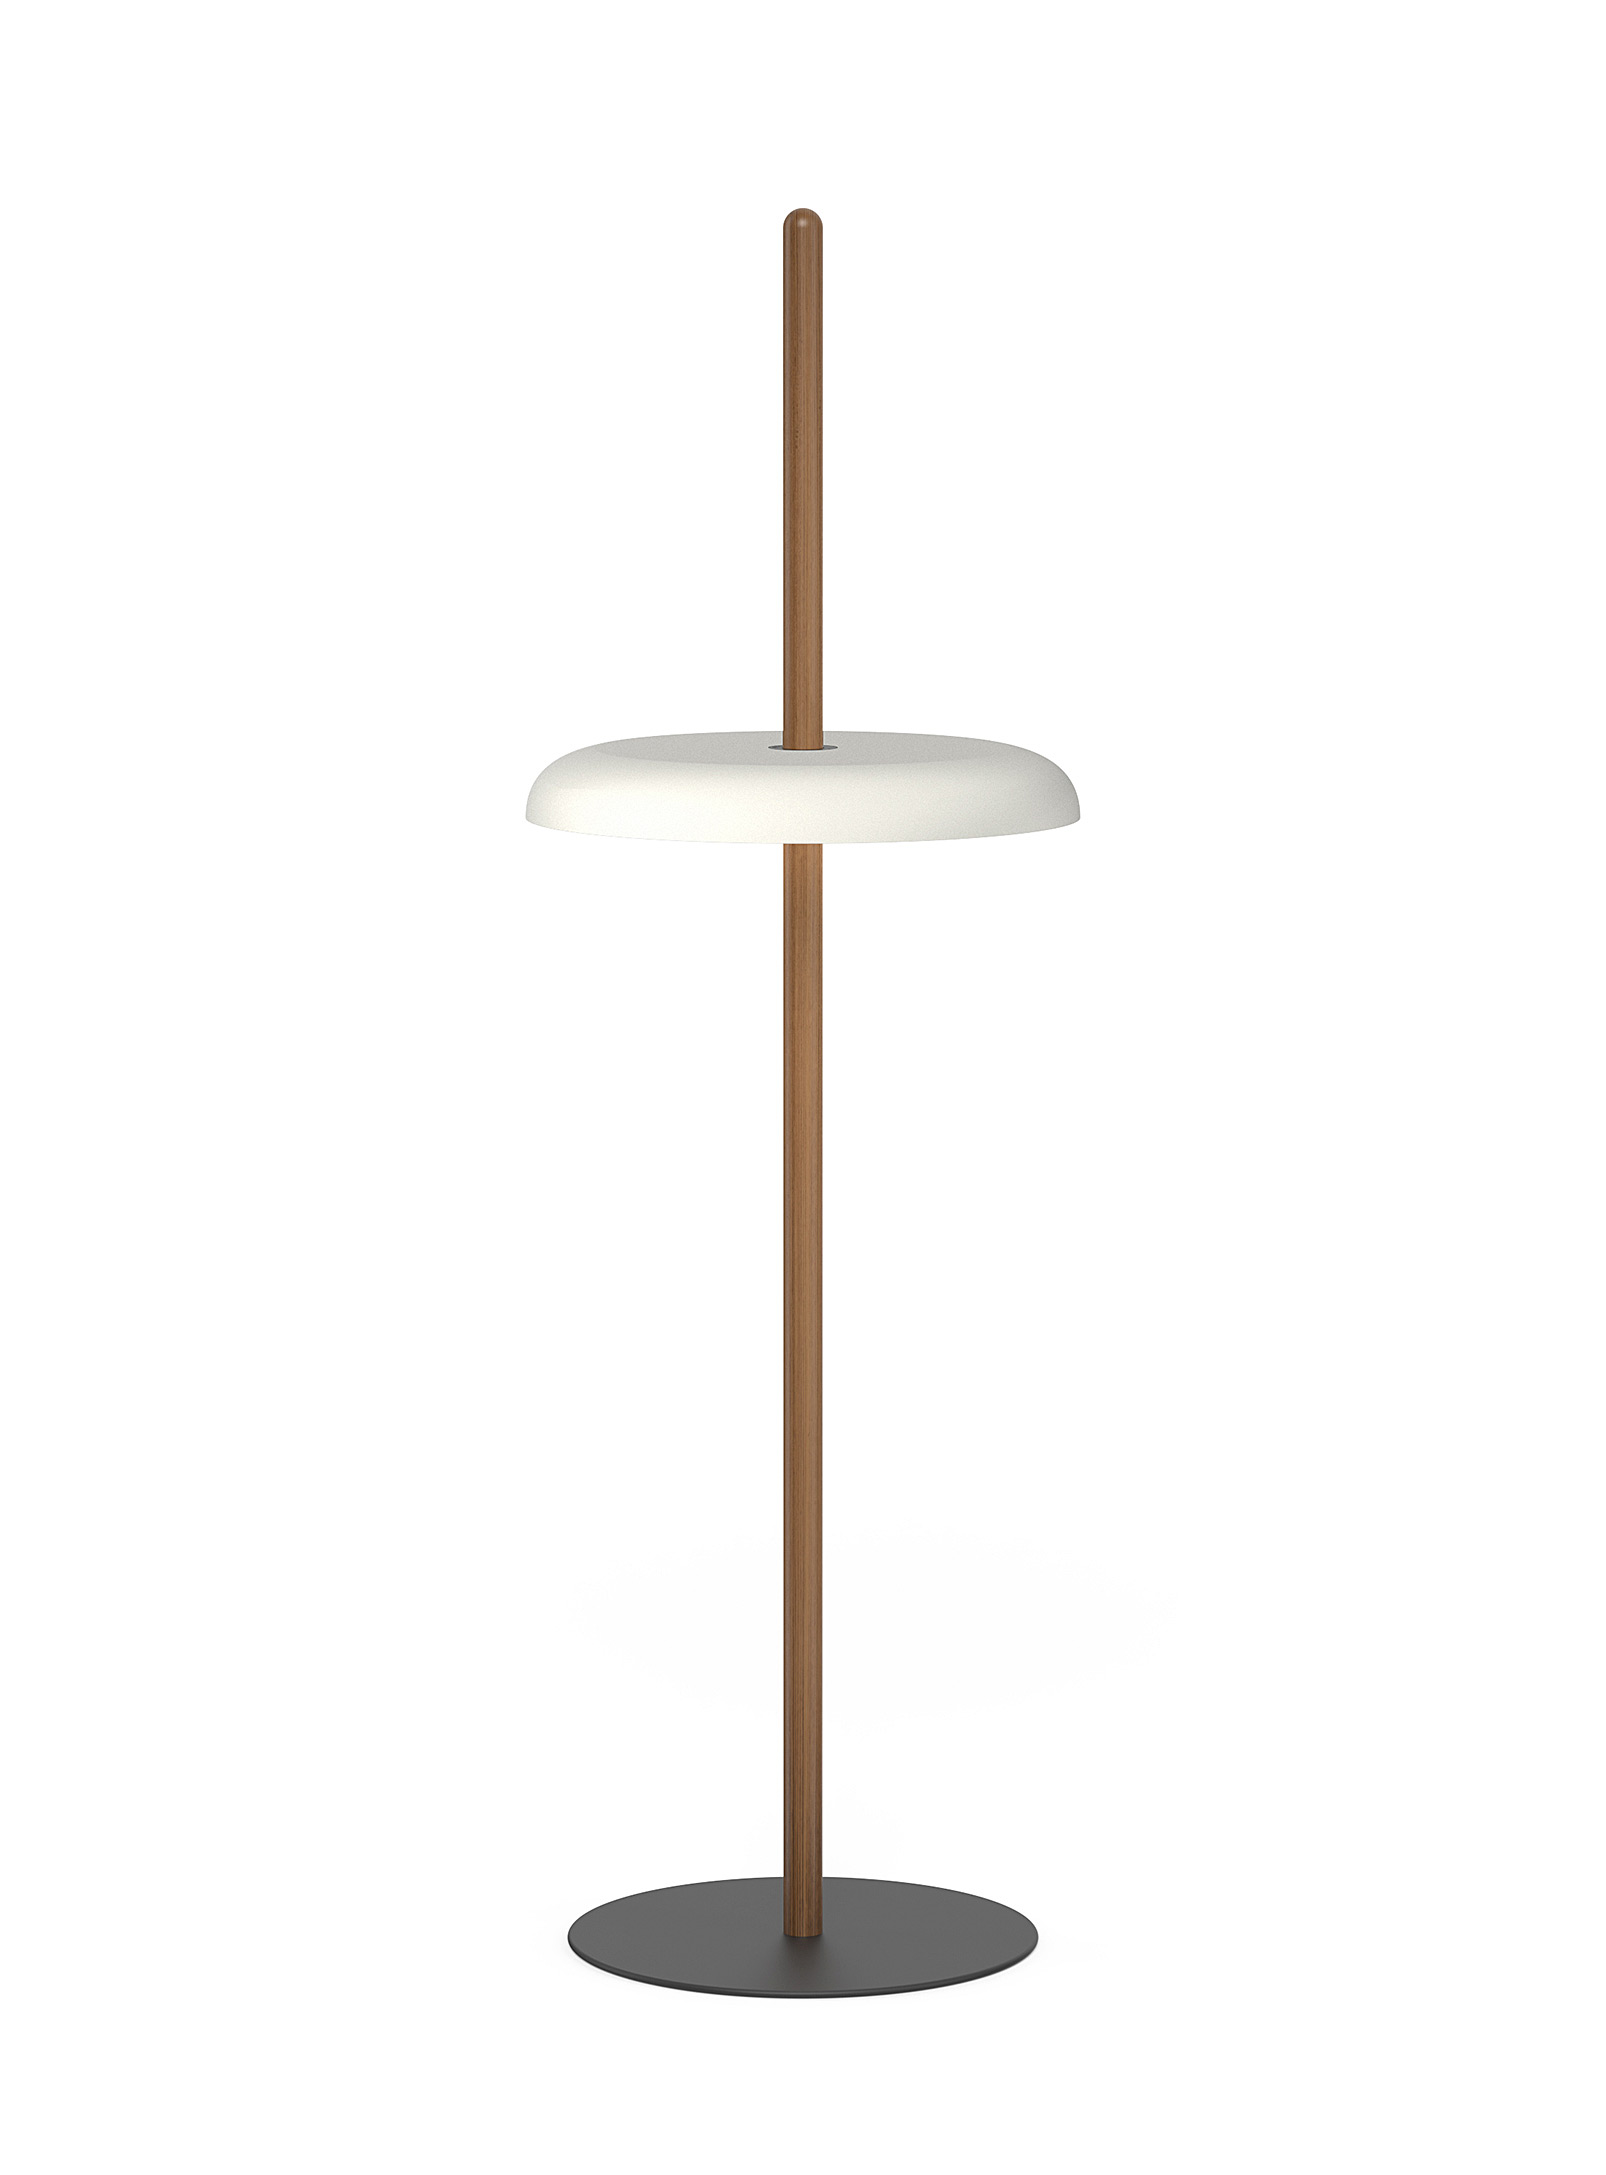 Pablo Designs Nivél Floor Lamp With Solid Walnut Pole In White